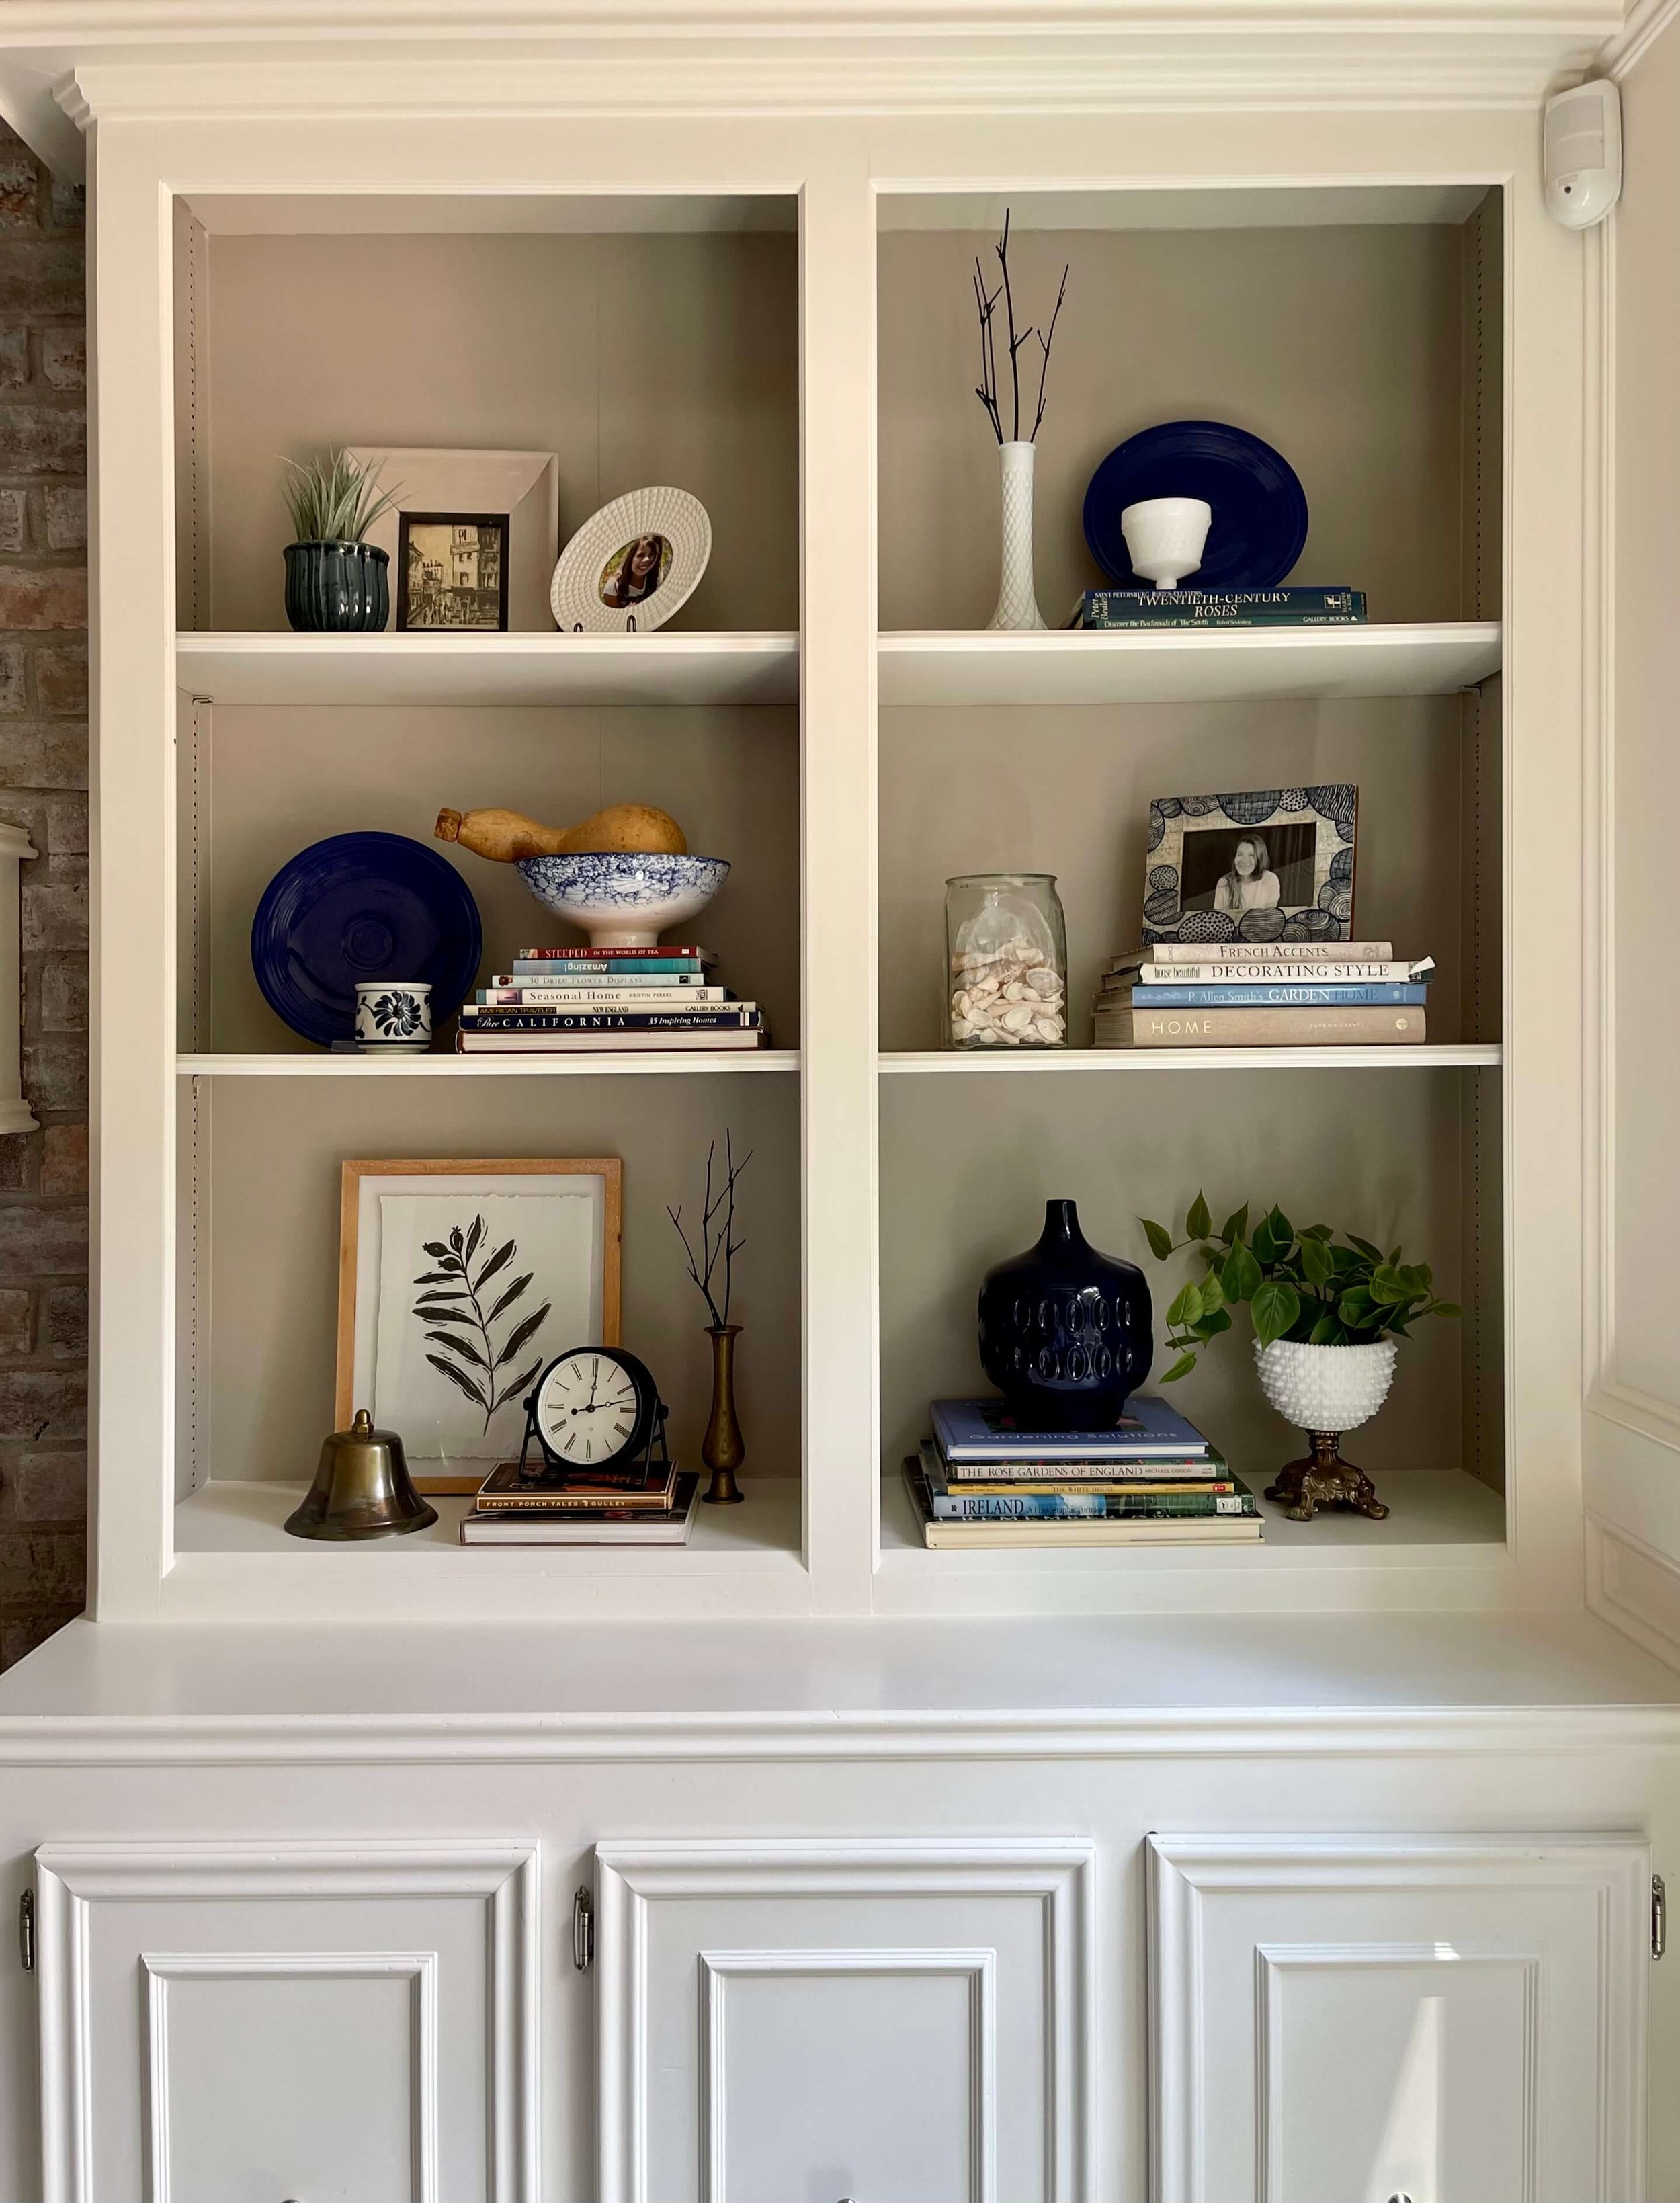 How To Decorate Your Fireplace Wall Built-In Bookshelves — Designed